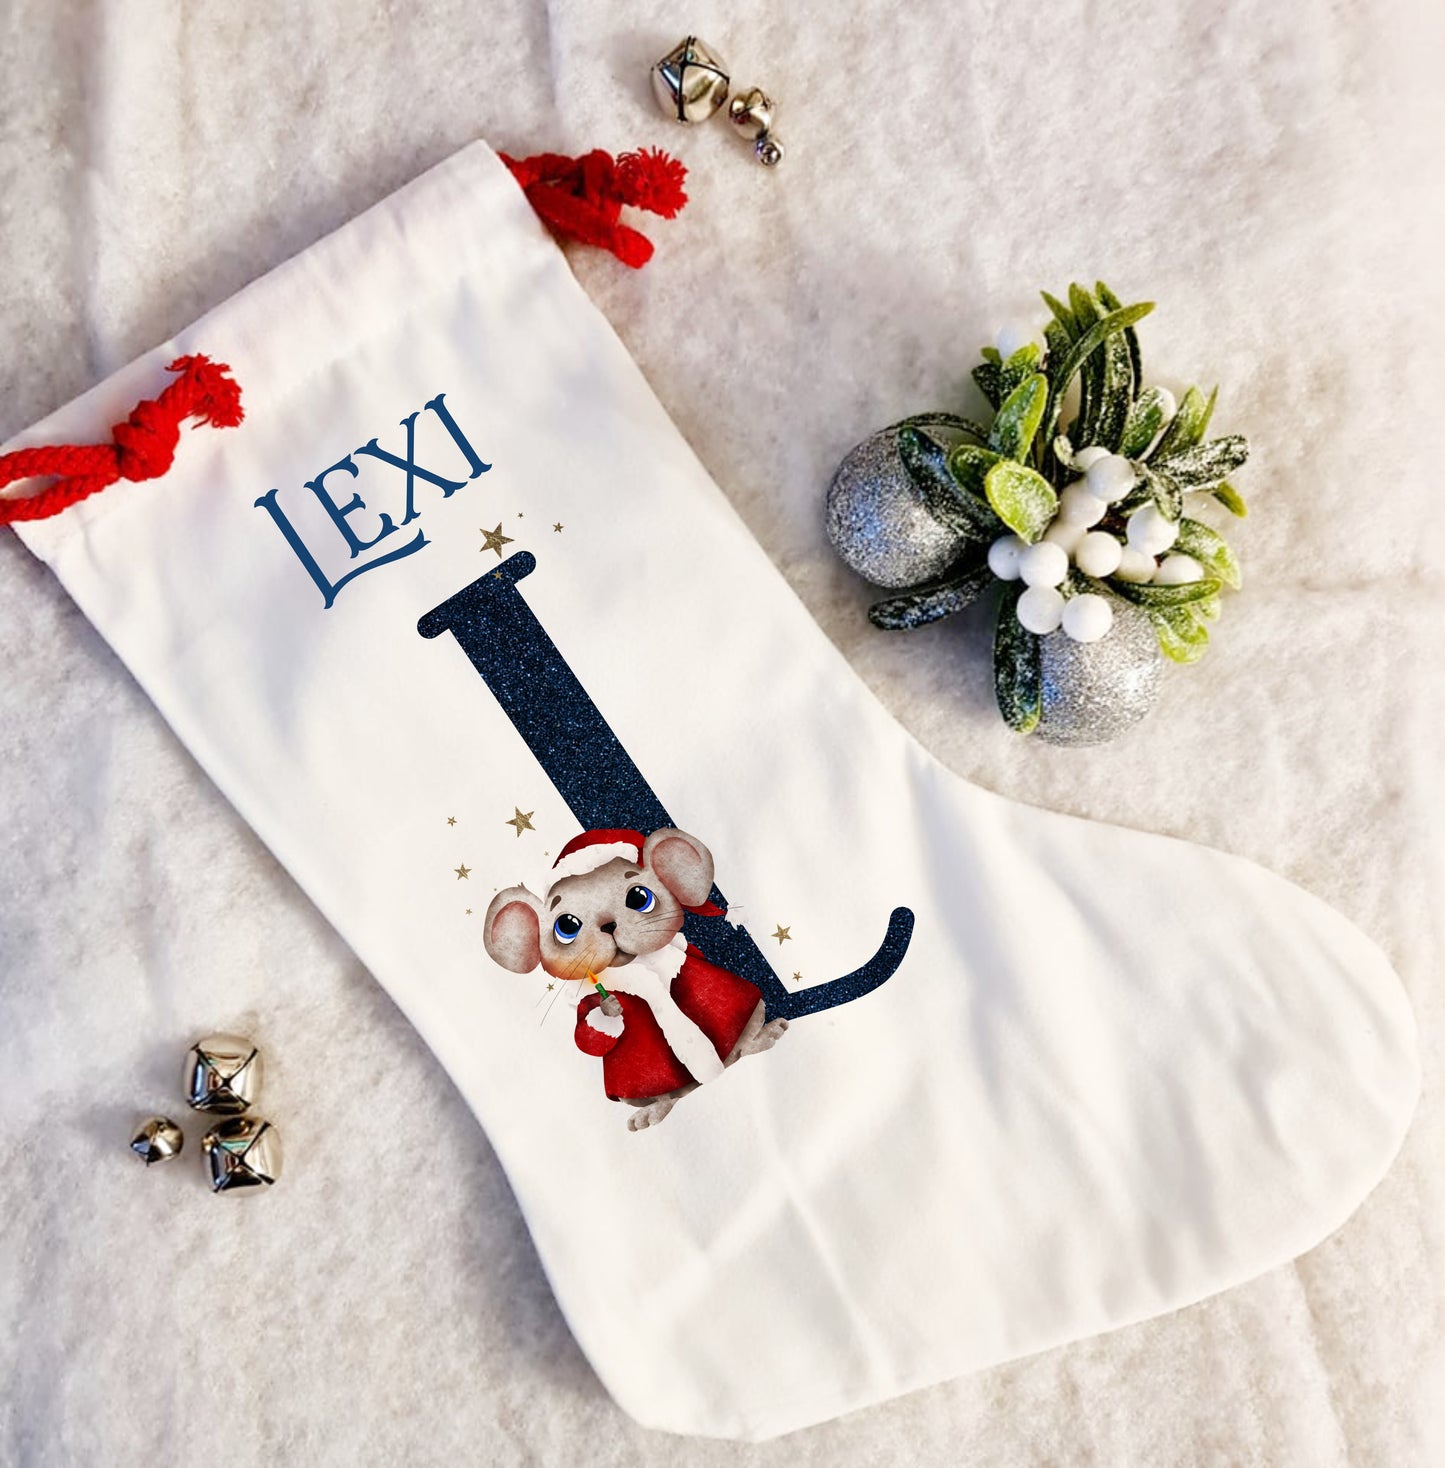 Personalised white Christmas stocking with a red rope tie and a Christmas mouse alphabet in red and navy